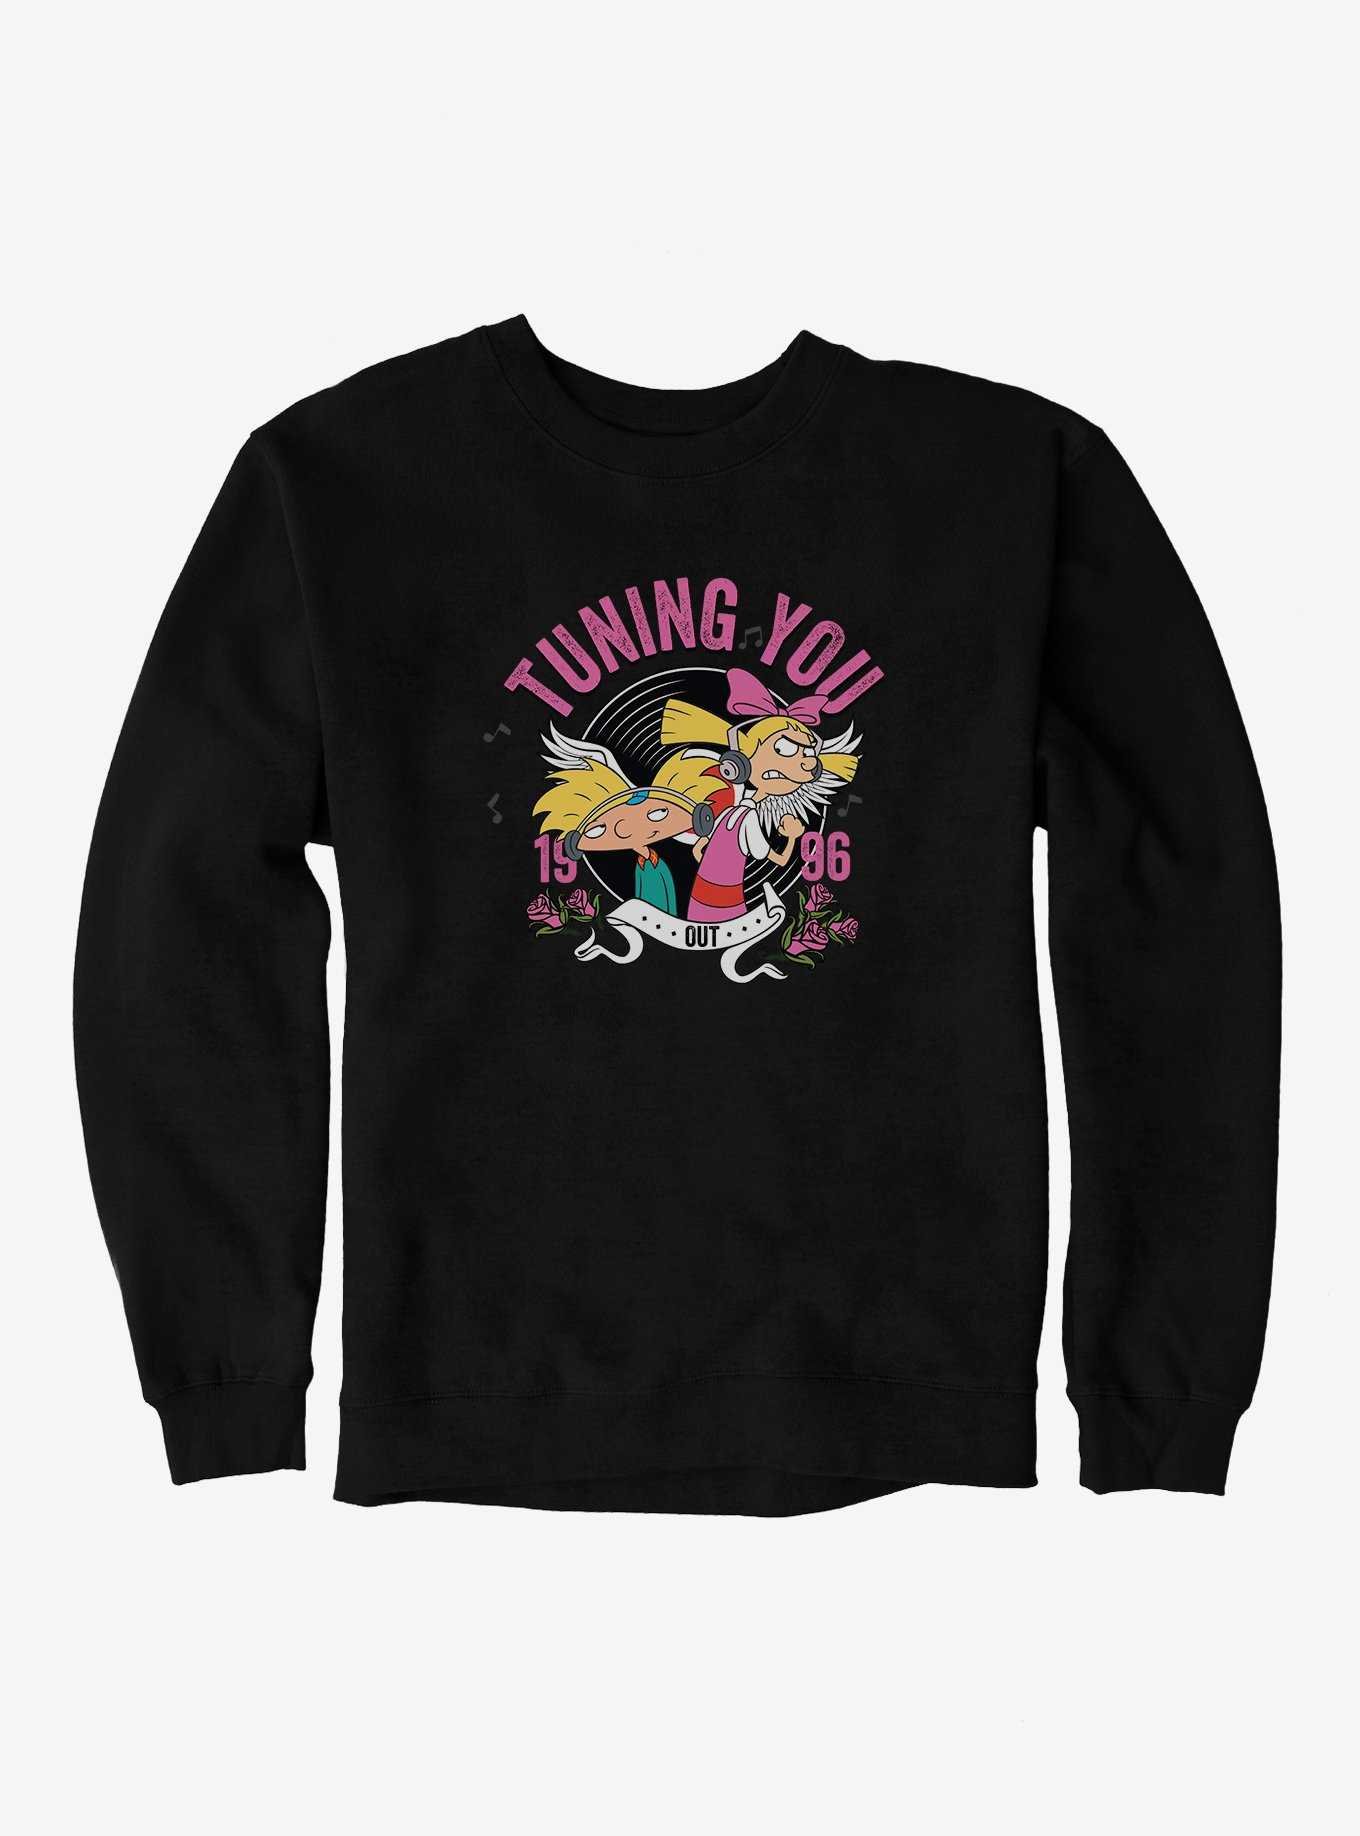 Hey Arnold! Tuning You Out 1996 Sweatshirt, , hi-res